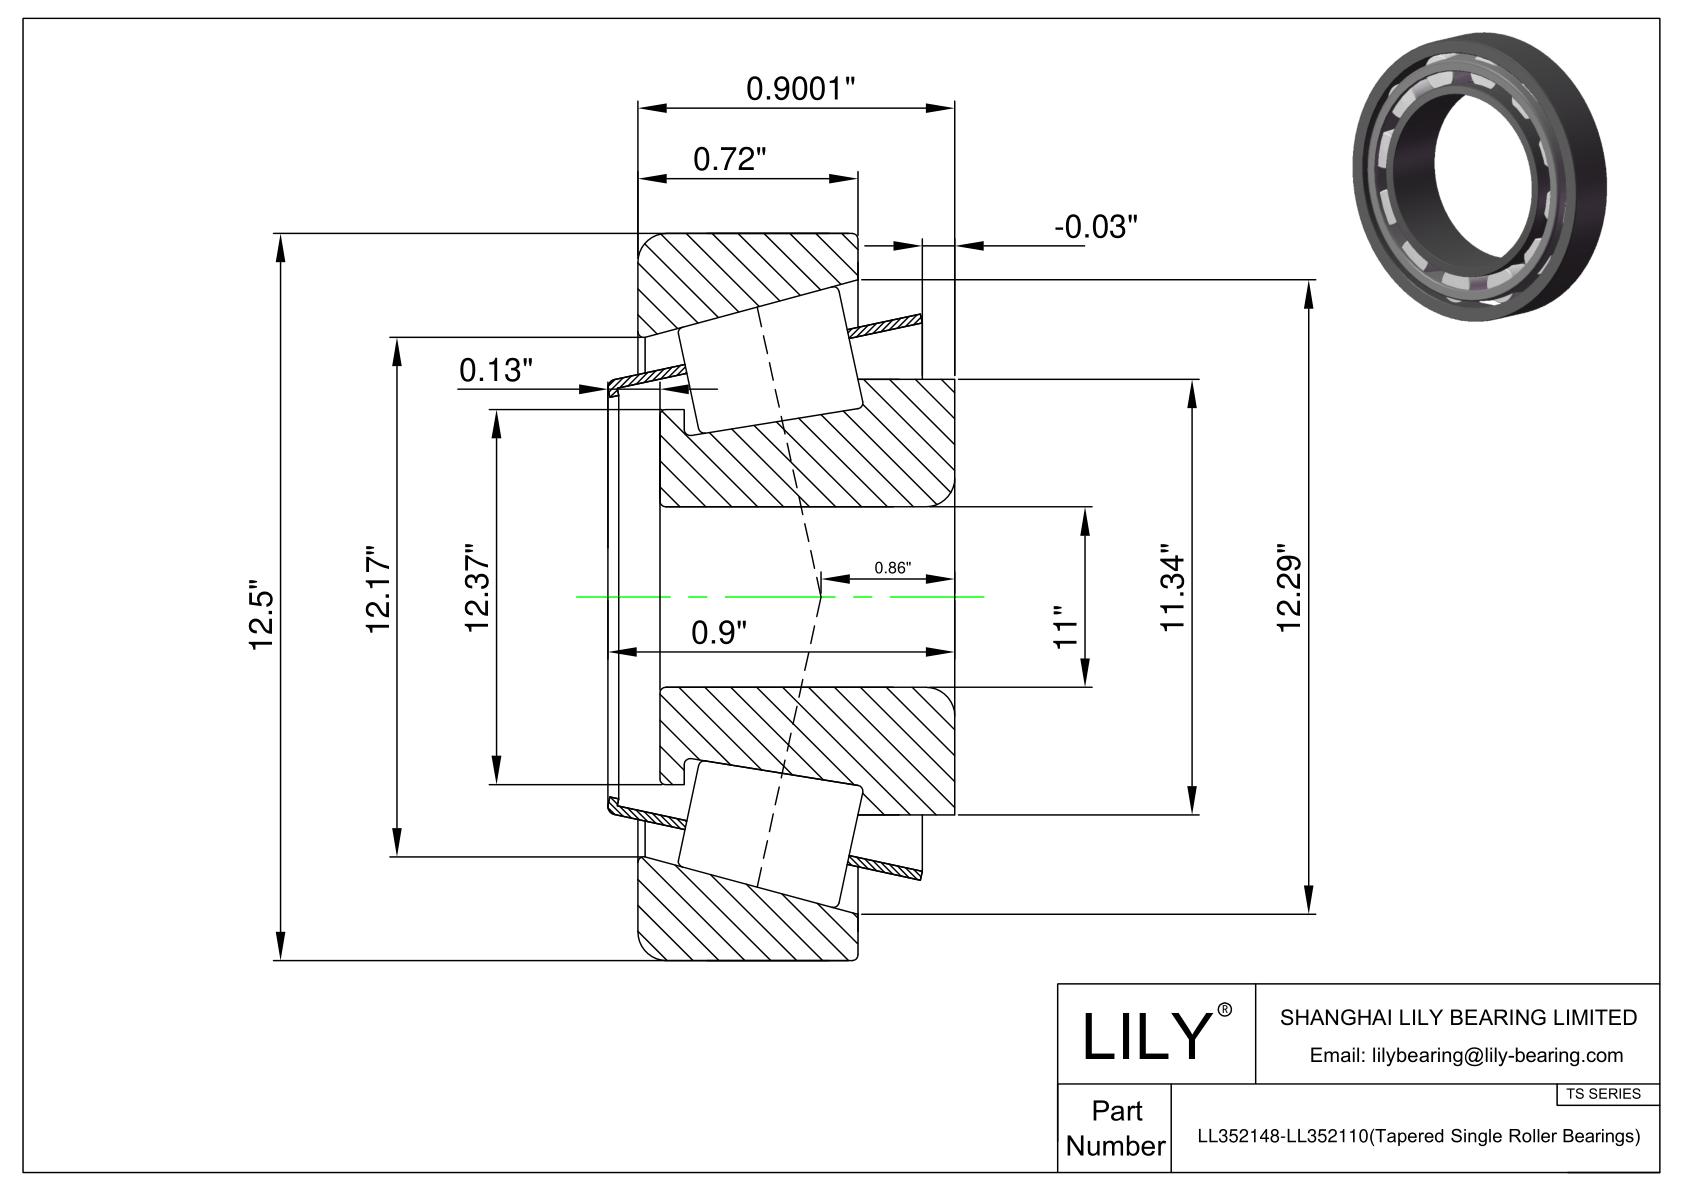 LL352148-LL352110 TS (Tapered Single Roller Bearings) (Imperial) cad drawing